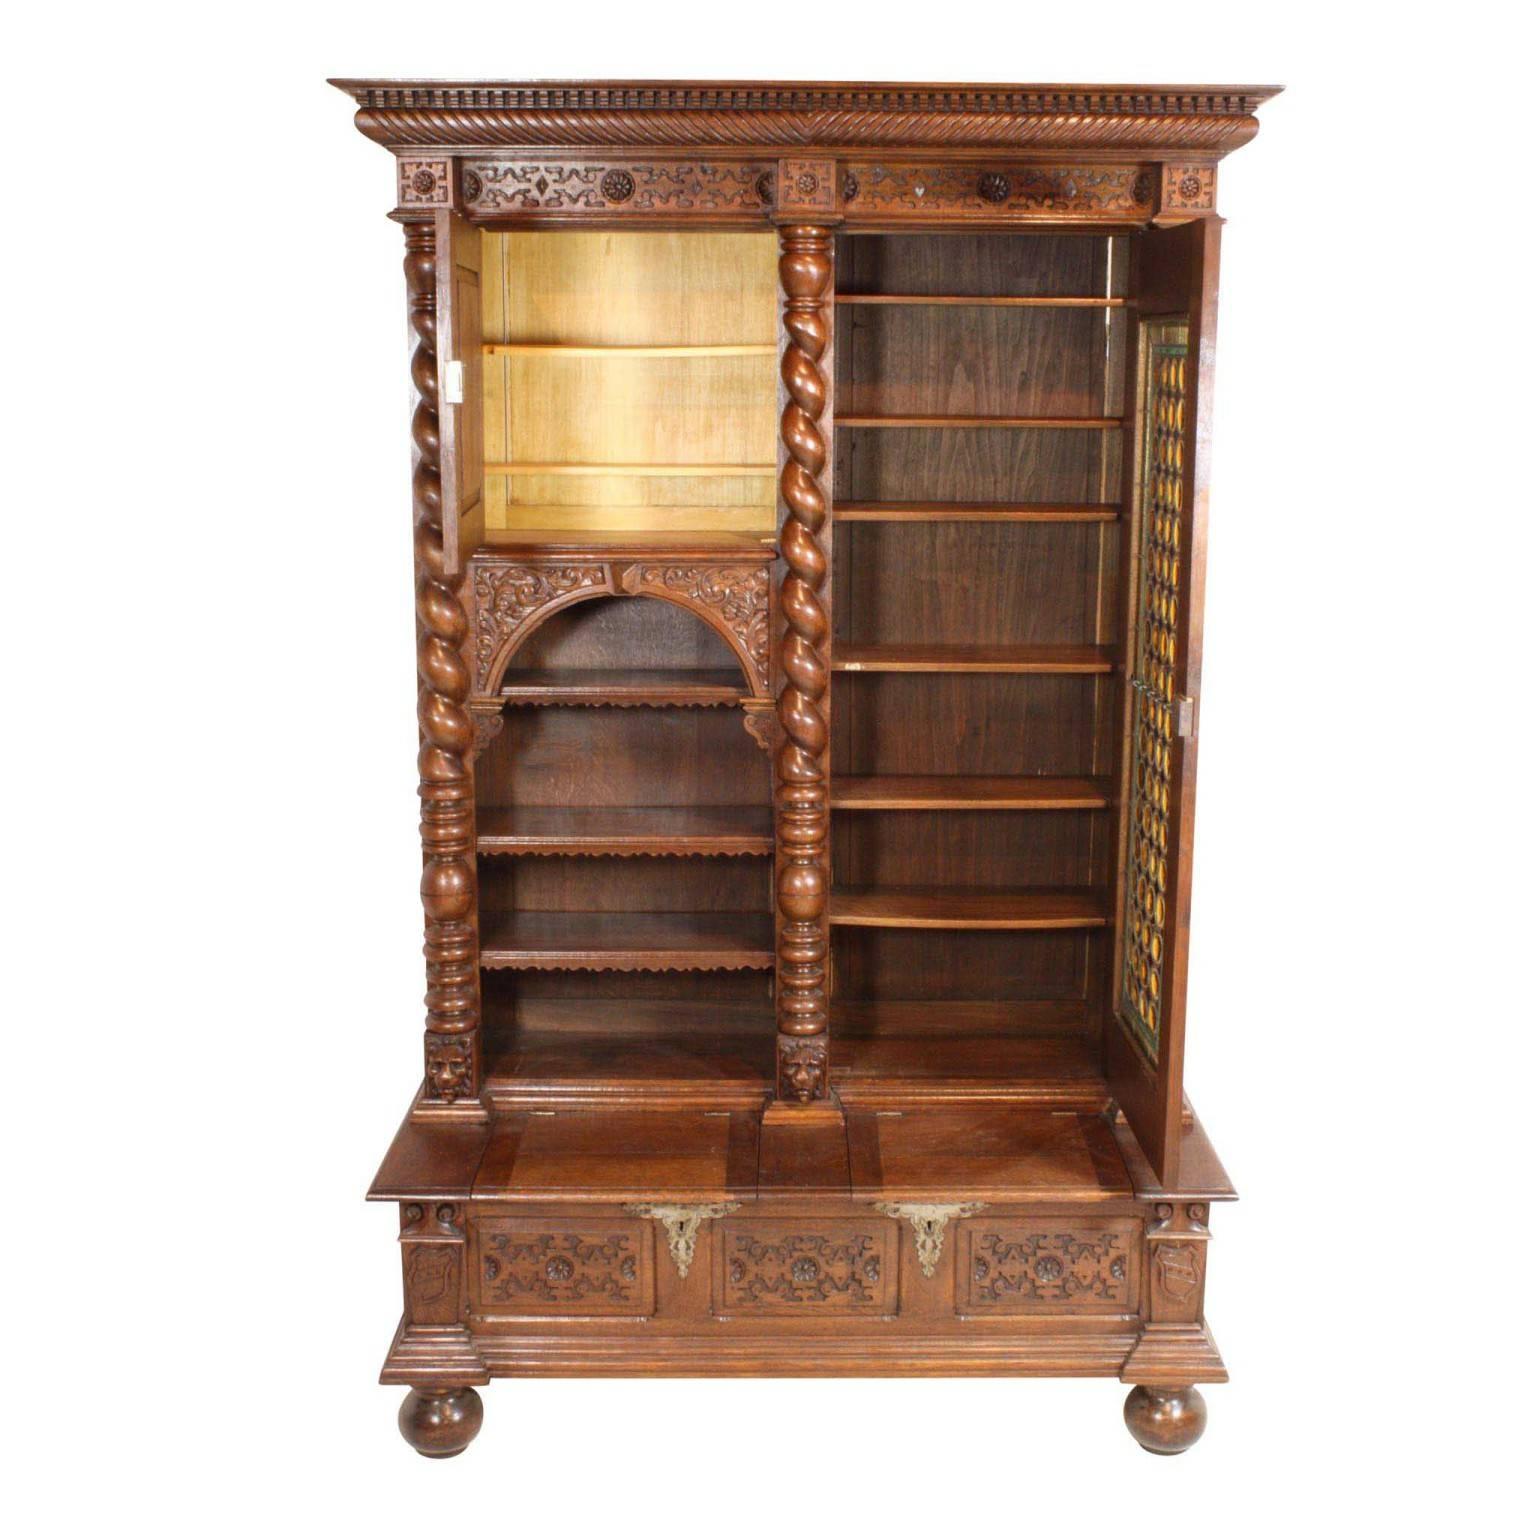 This bookcase is a stunner. Intricately carved embellishments from head to toe, including: Barley twist columns, lions heads, Green Men with vines, scalloped shells and shields, this piece needs to be seen up close and in person. The Leaded glass